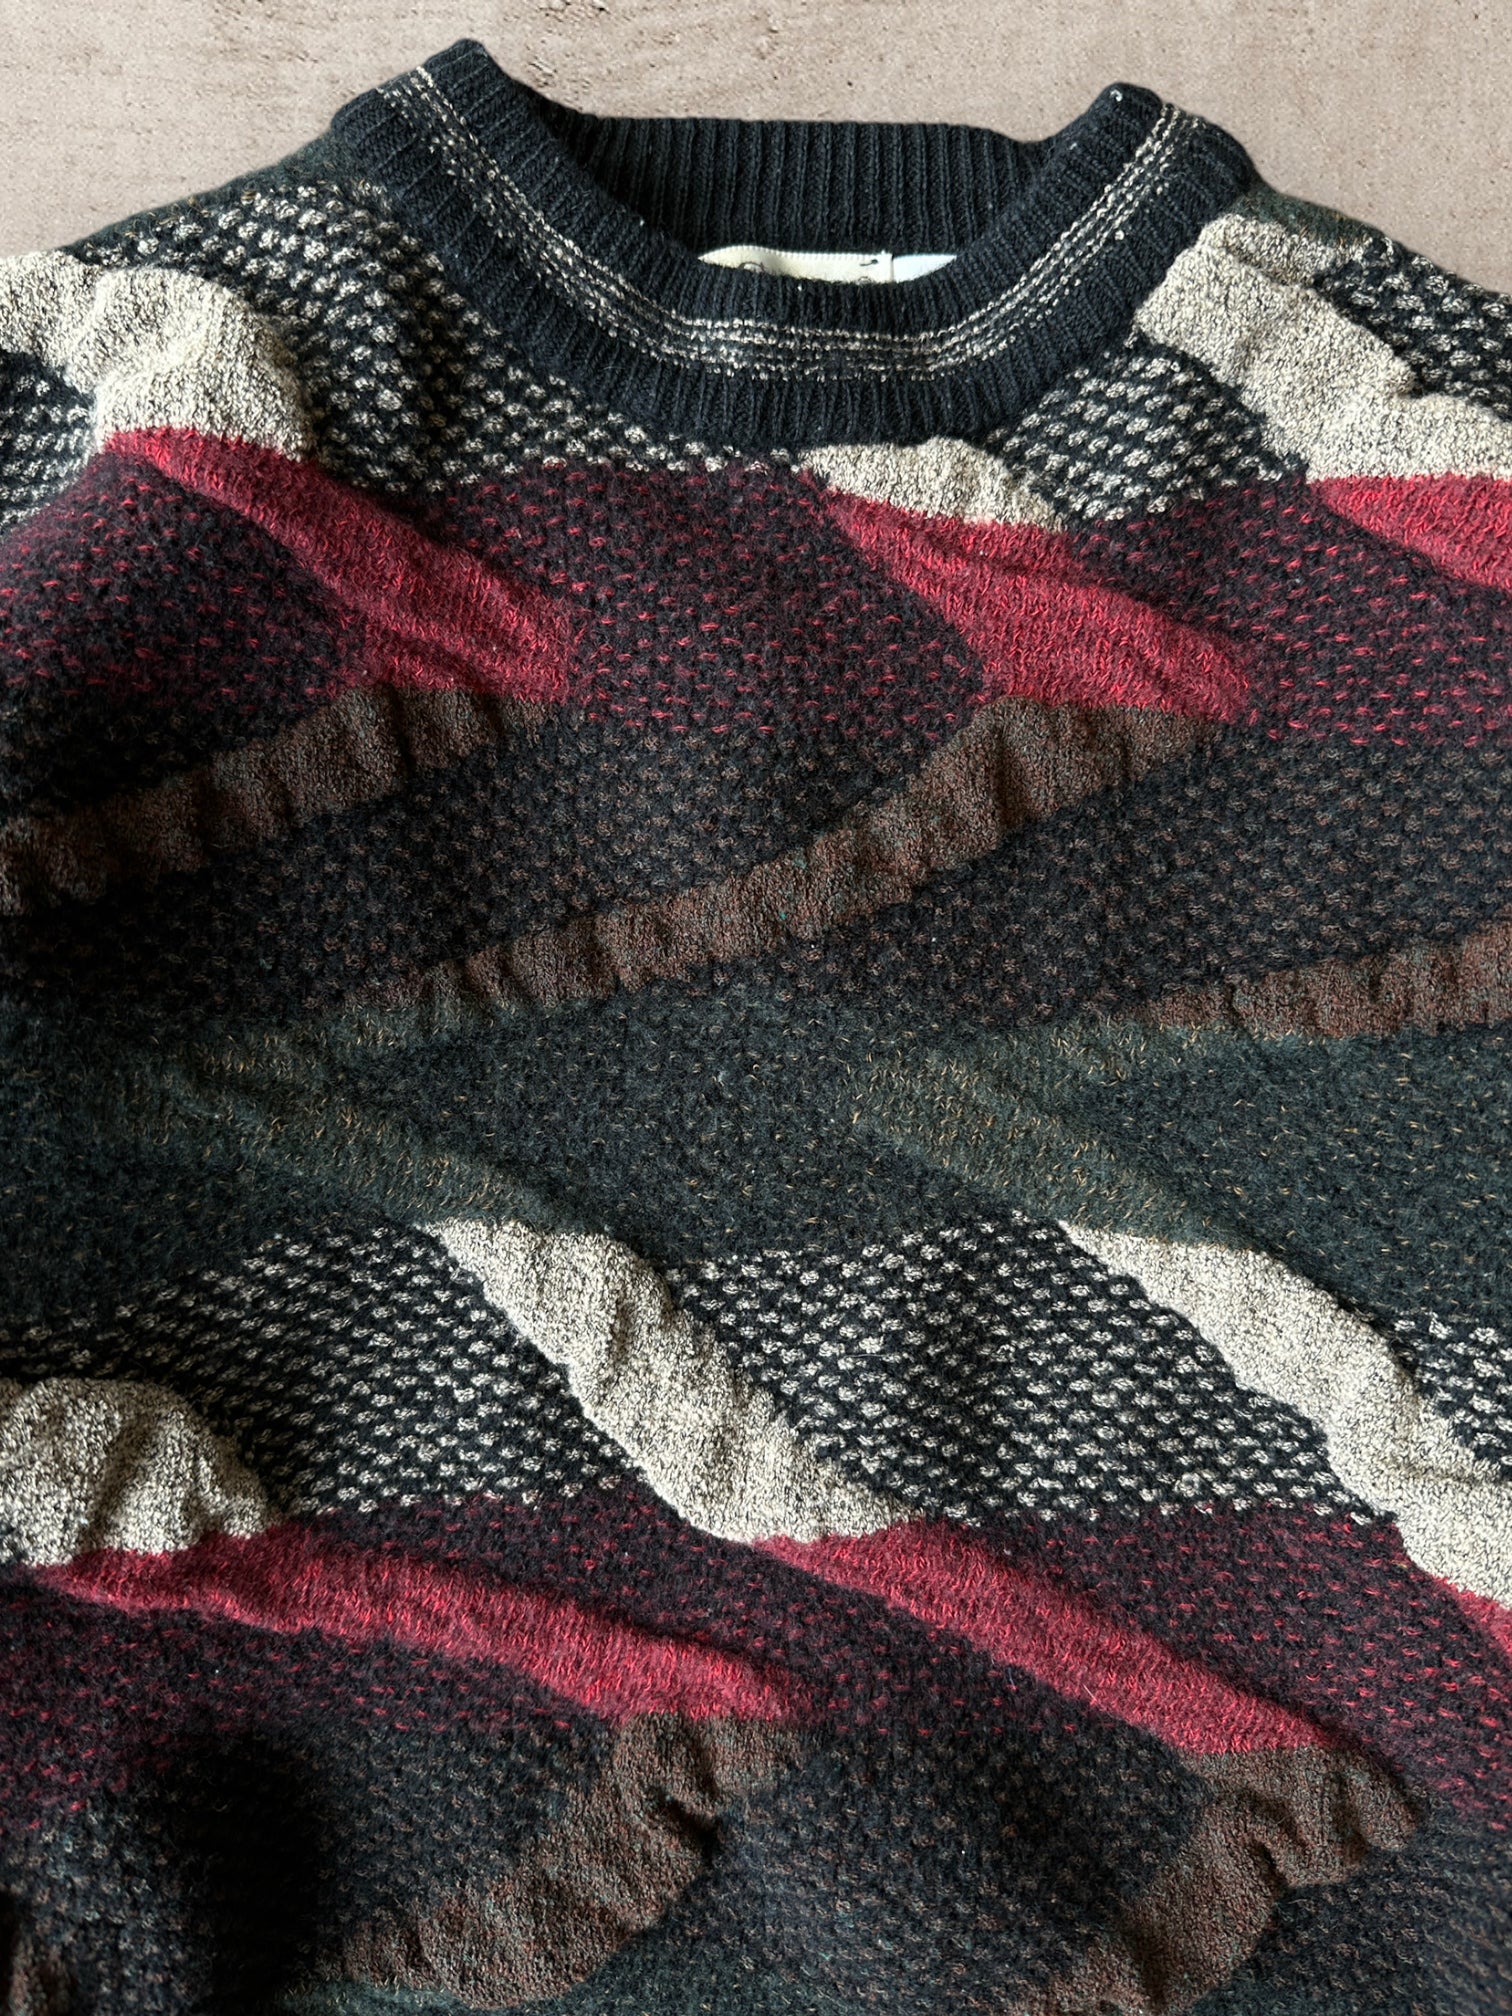 90s Multicolor 3D Knit Sweater - Small